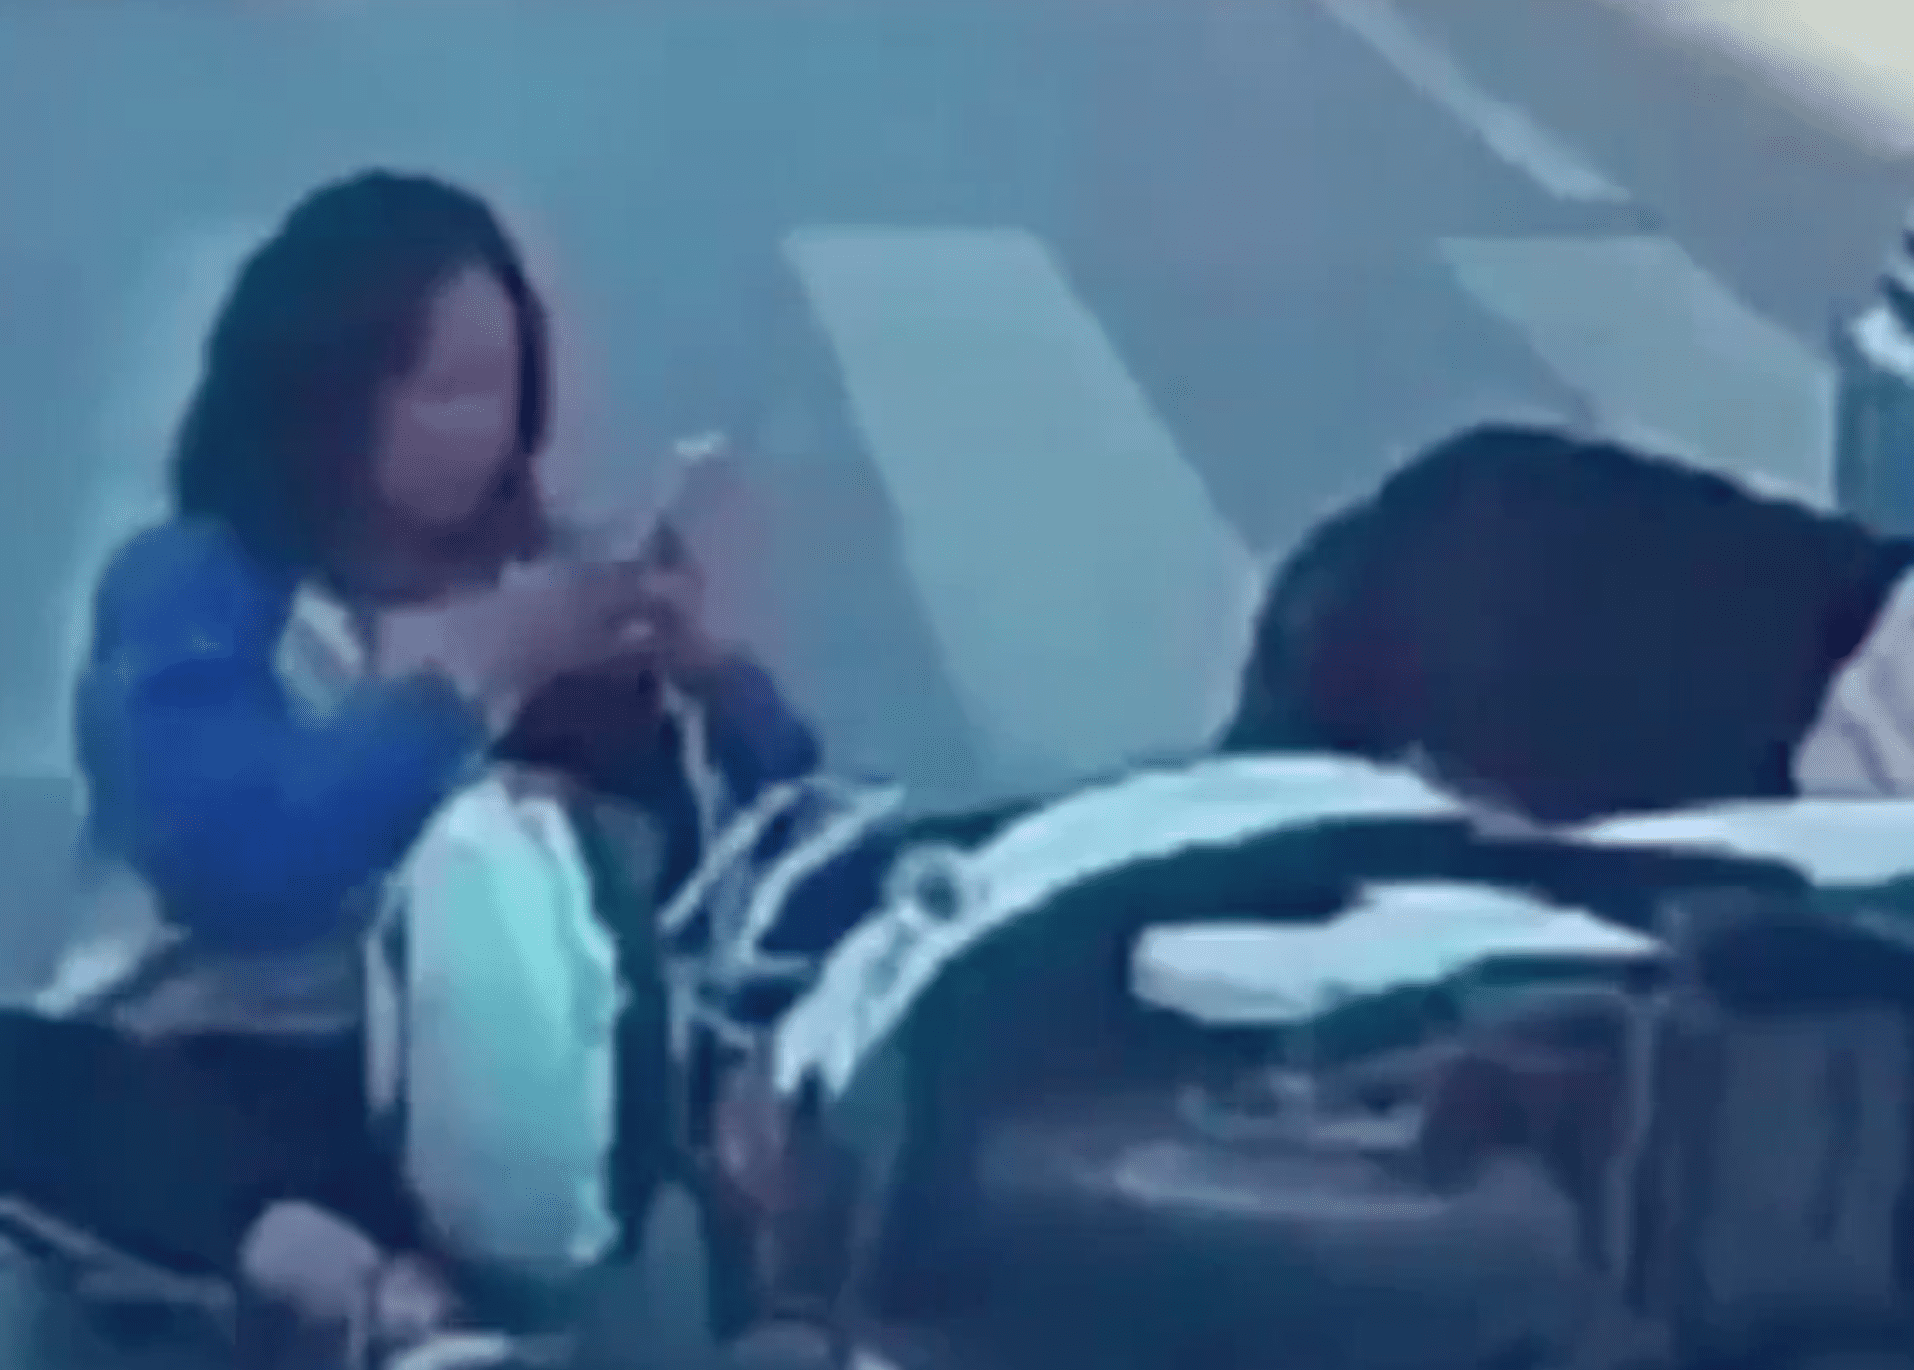 Woman texts in the middle of an accident scene | Photo: Reddit/Whatcouldgowrong